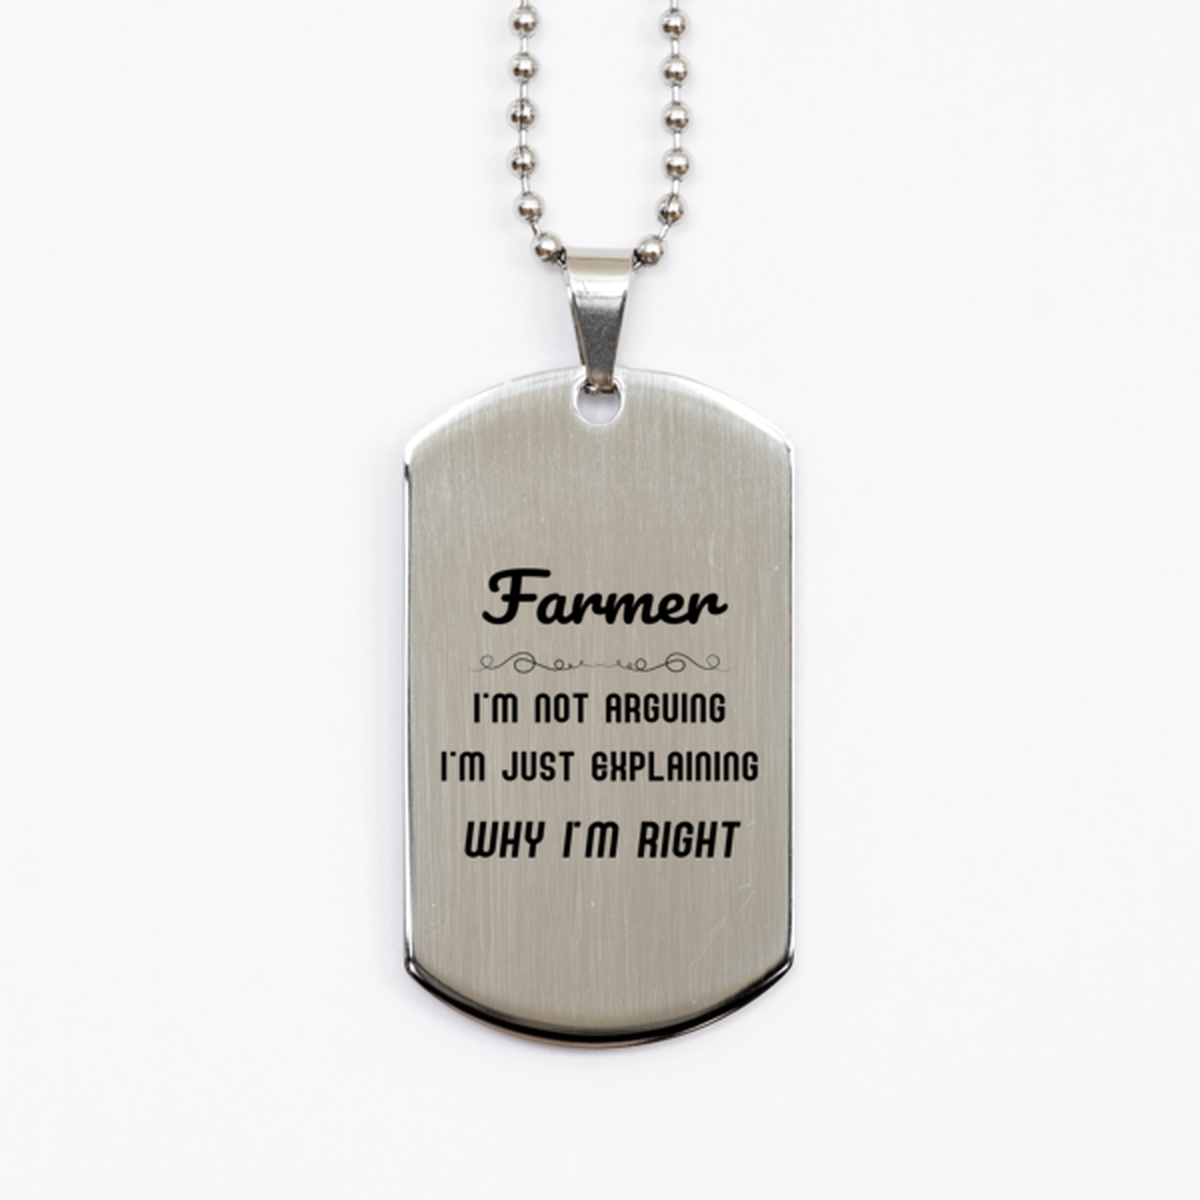 Farmer I'm not Arguing. I'm Just Explaining Why I'm RIGHT Silver Dog Tag, Funny Saying Quote Farmer Gifts For Farmer Graduation Birthday Christmas Gifts for Men Women Coworker